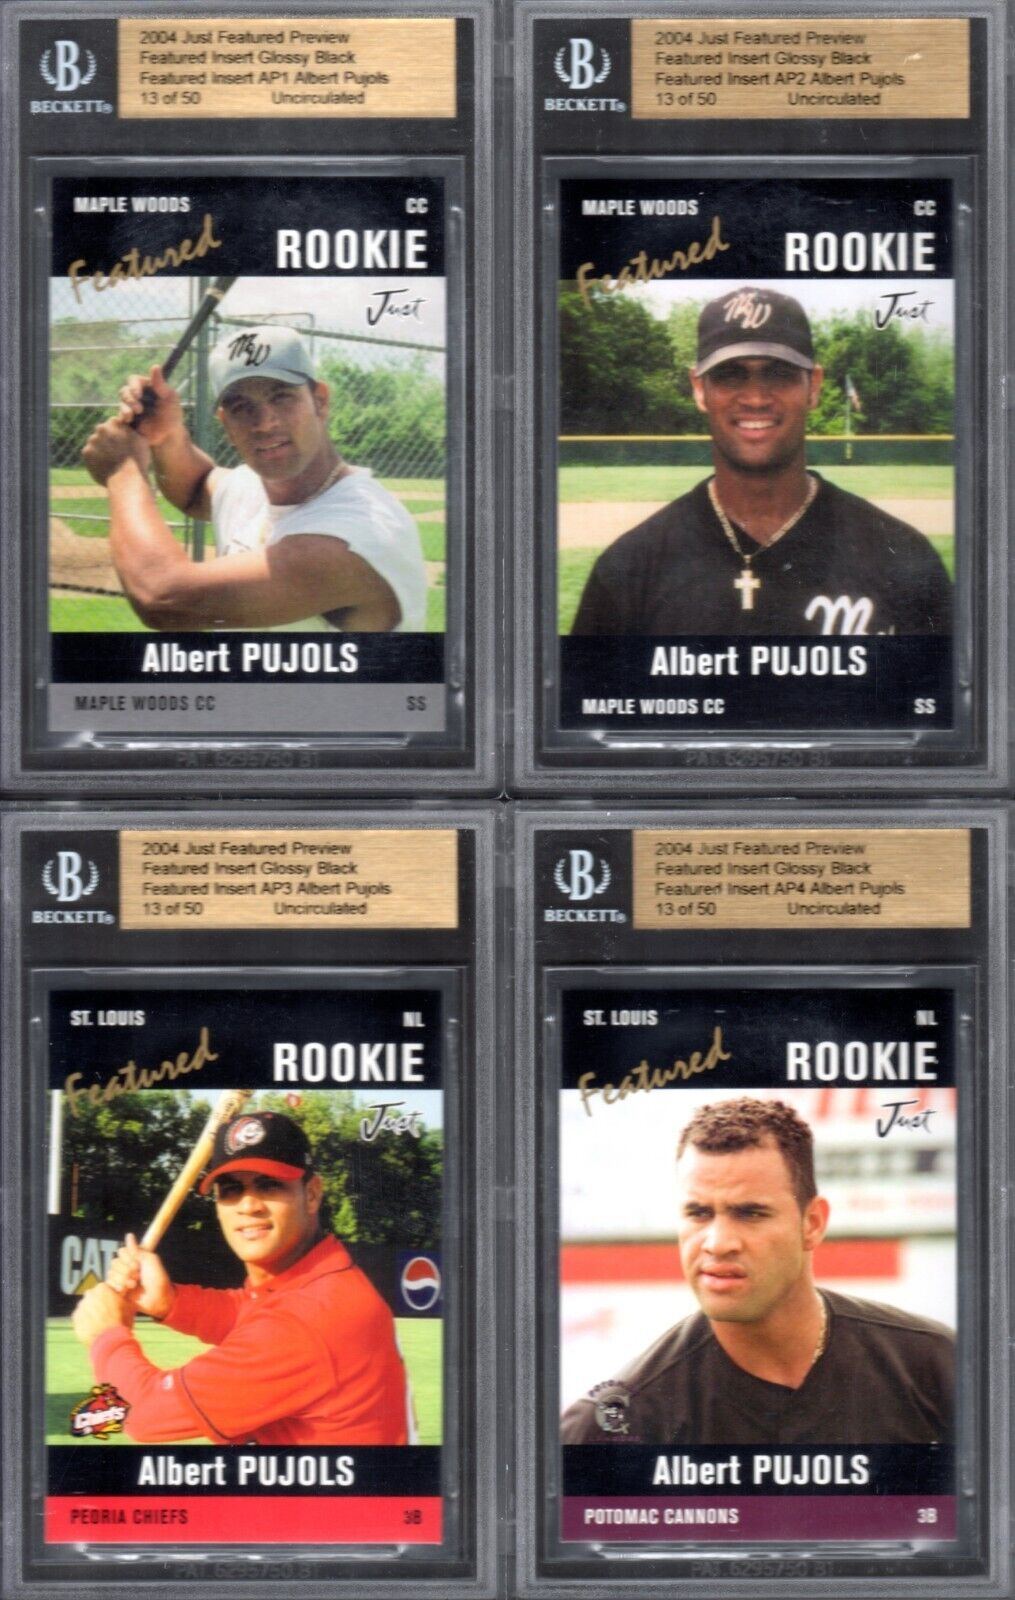 2004 JUST FEATURED PREVIEW GLOSSY BLACK #\'d /50 #AP1-5 ALBERT PUJOLS ROOKIE SET